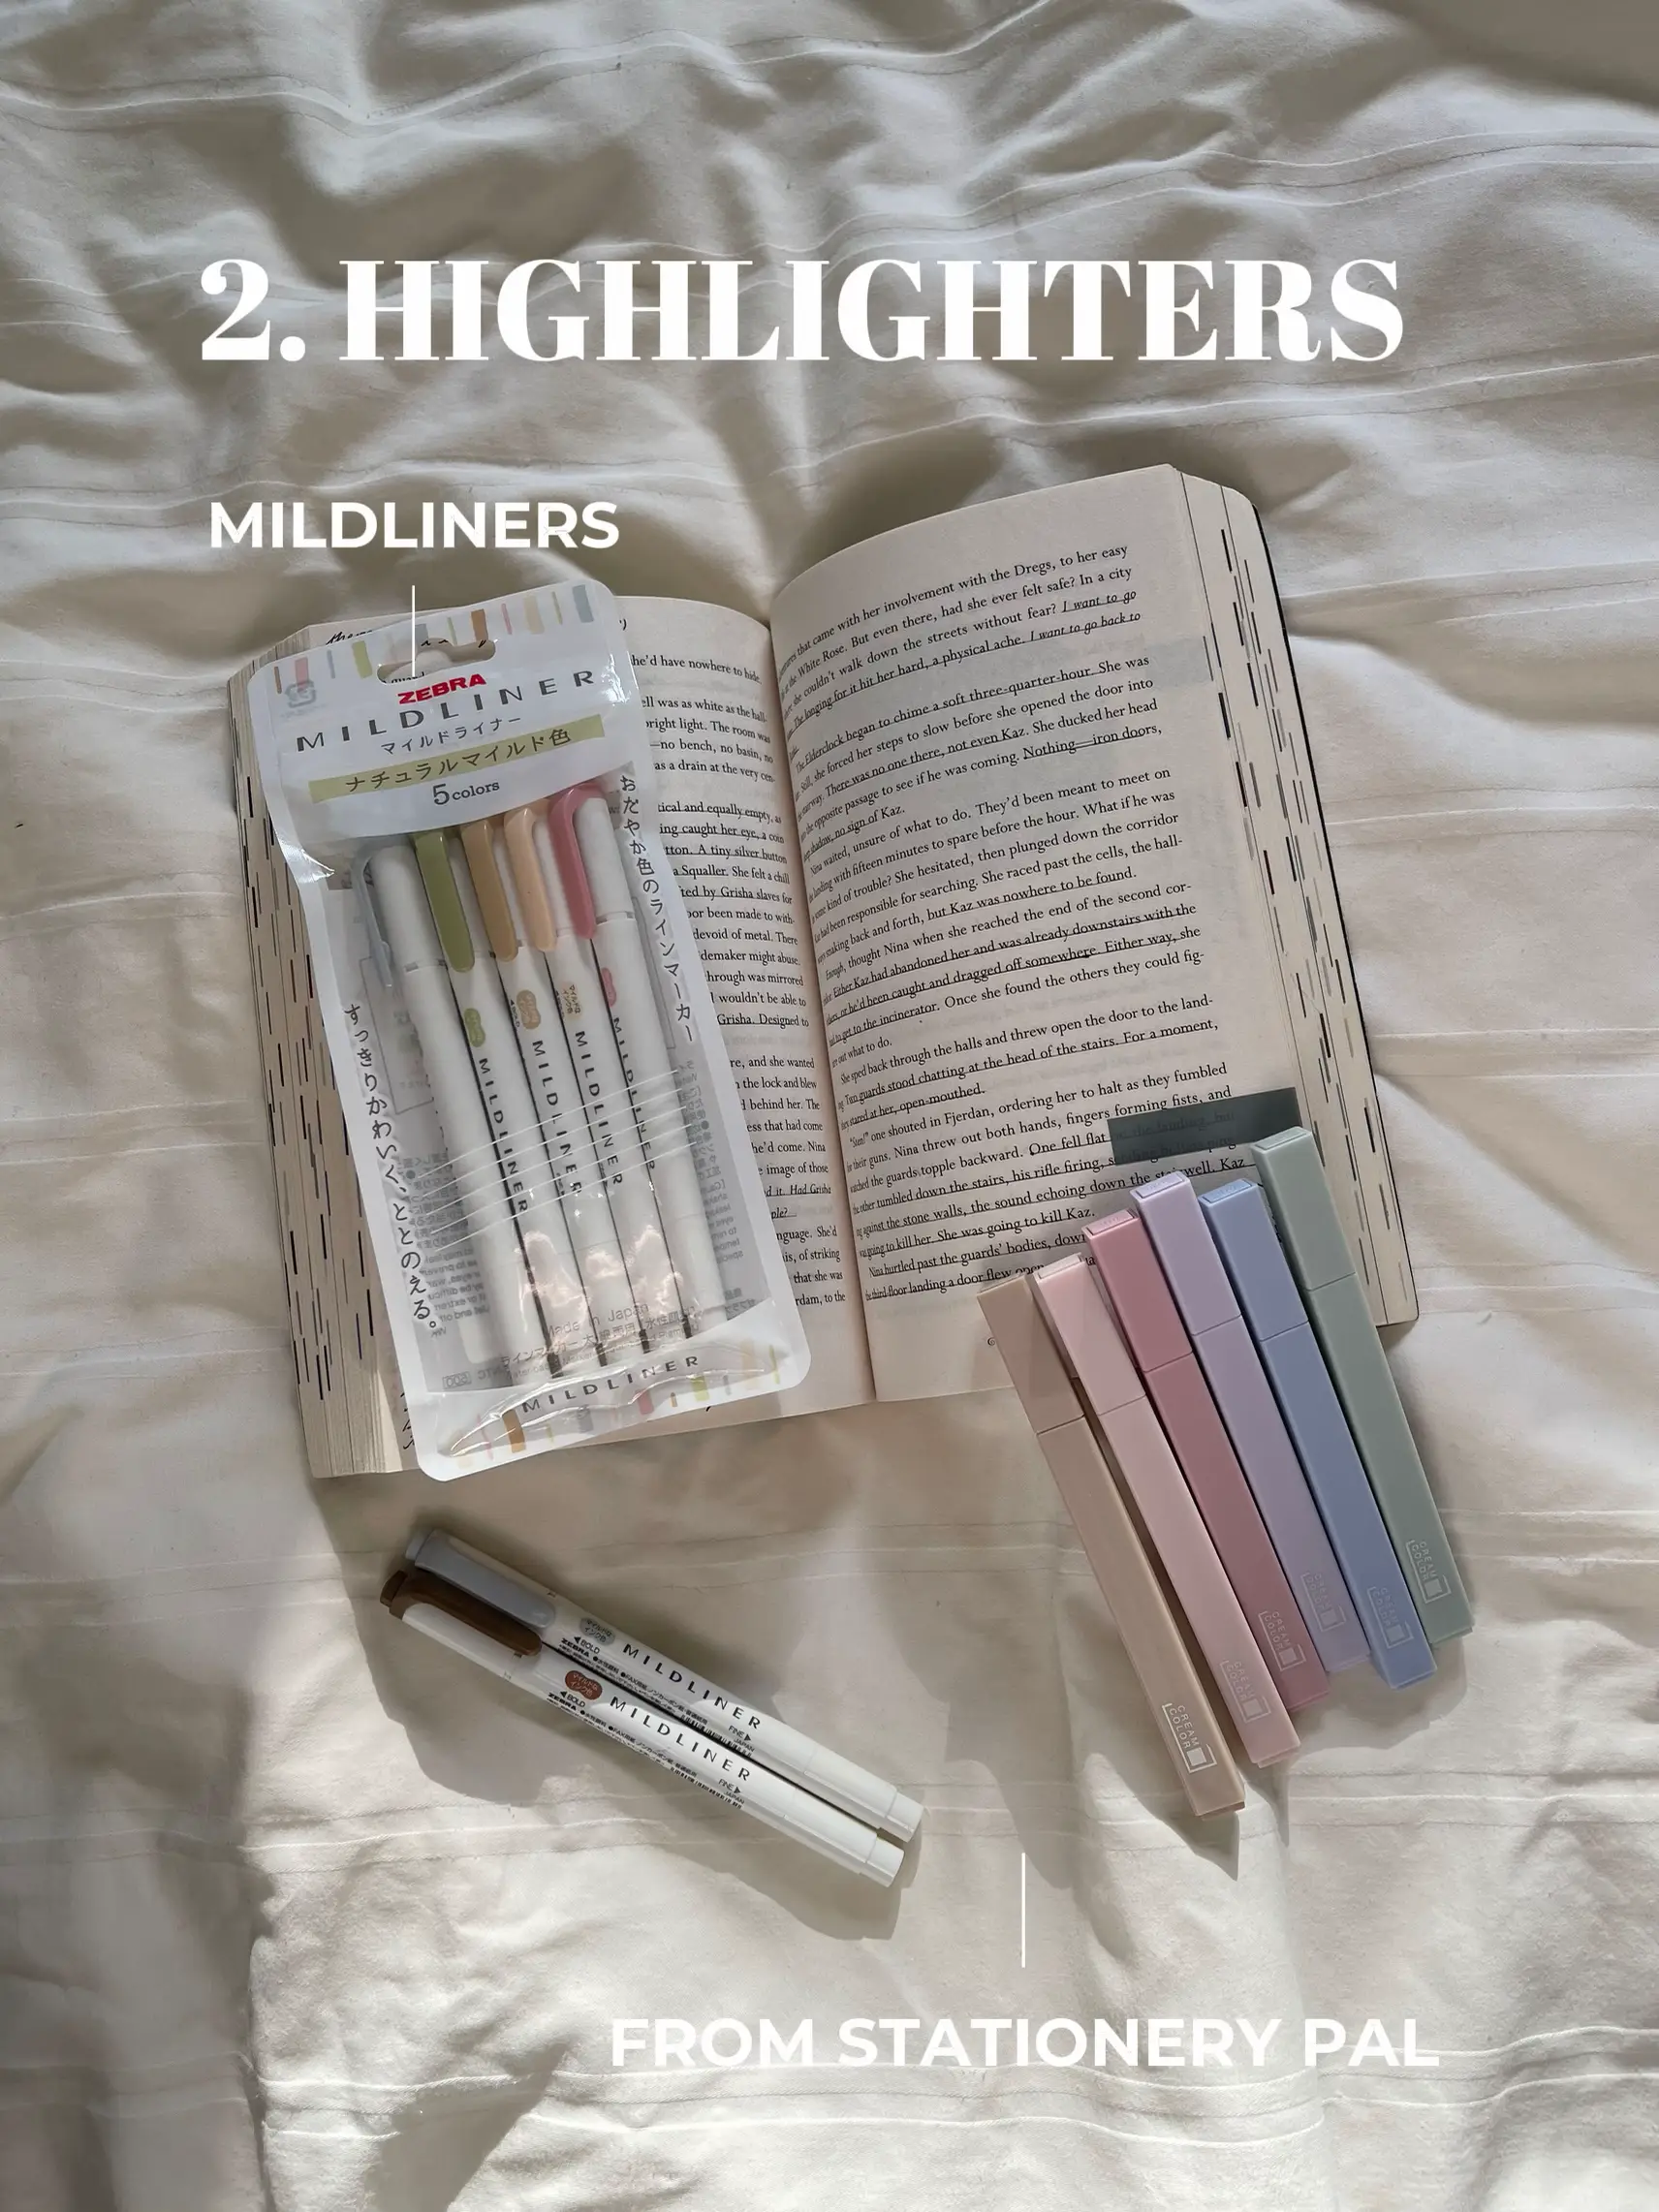 Mr. Pen- Aesthetic Highlighters and Pens No Bleed, 12 Pack, Pastel Color,  Black Ink, No Bleed Highlighters for Bibles - Yahoo Shopping